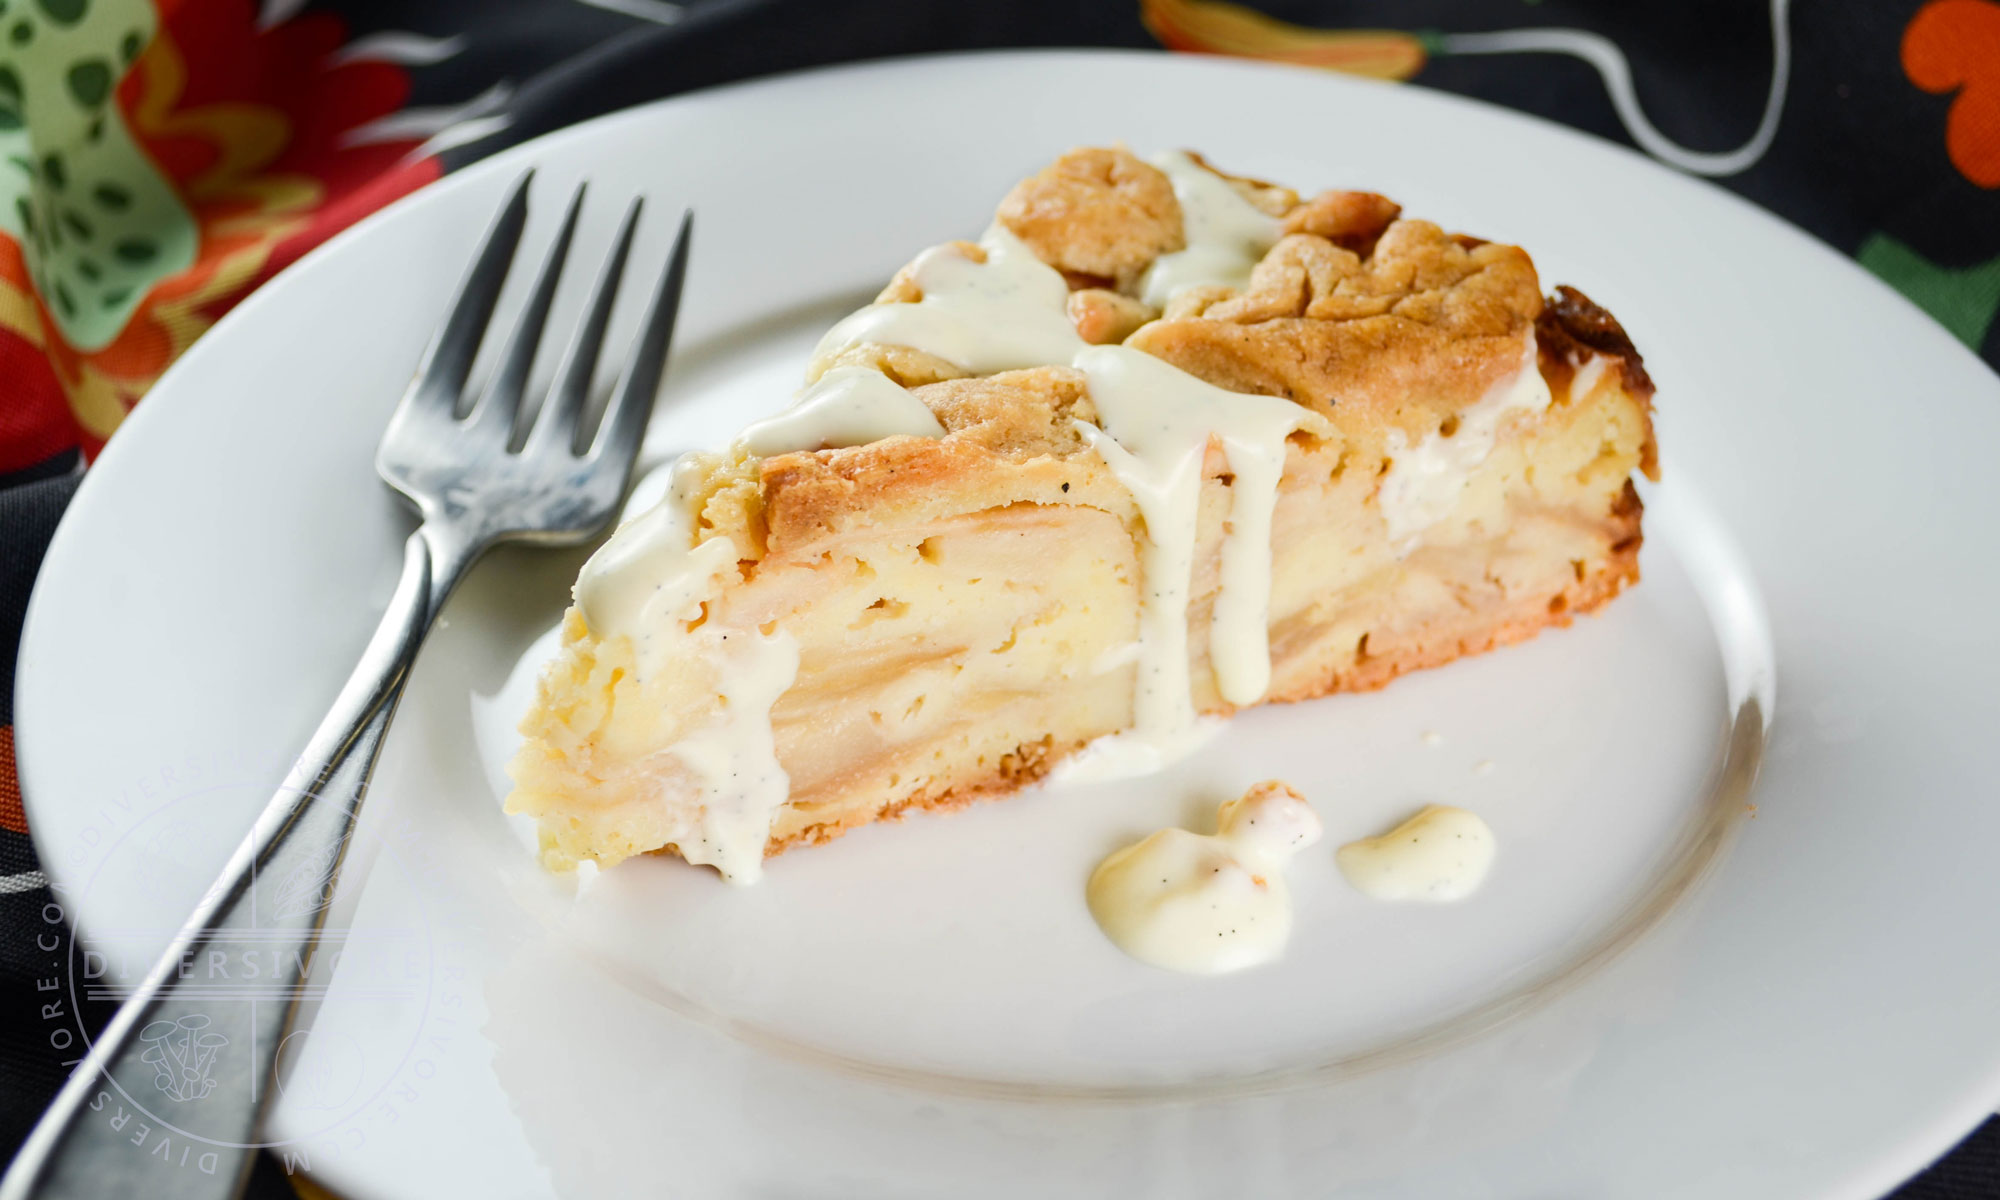 A slice of Swedish apple cake with vanilla sauce on a plate with a fork